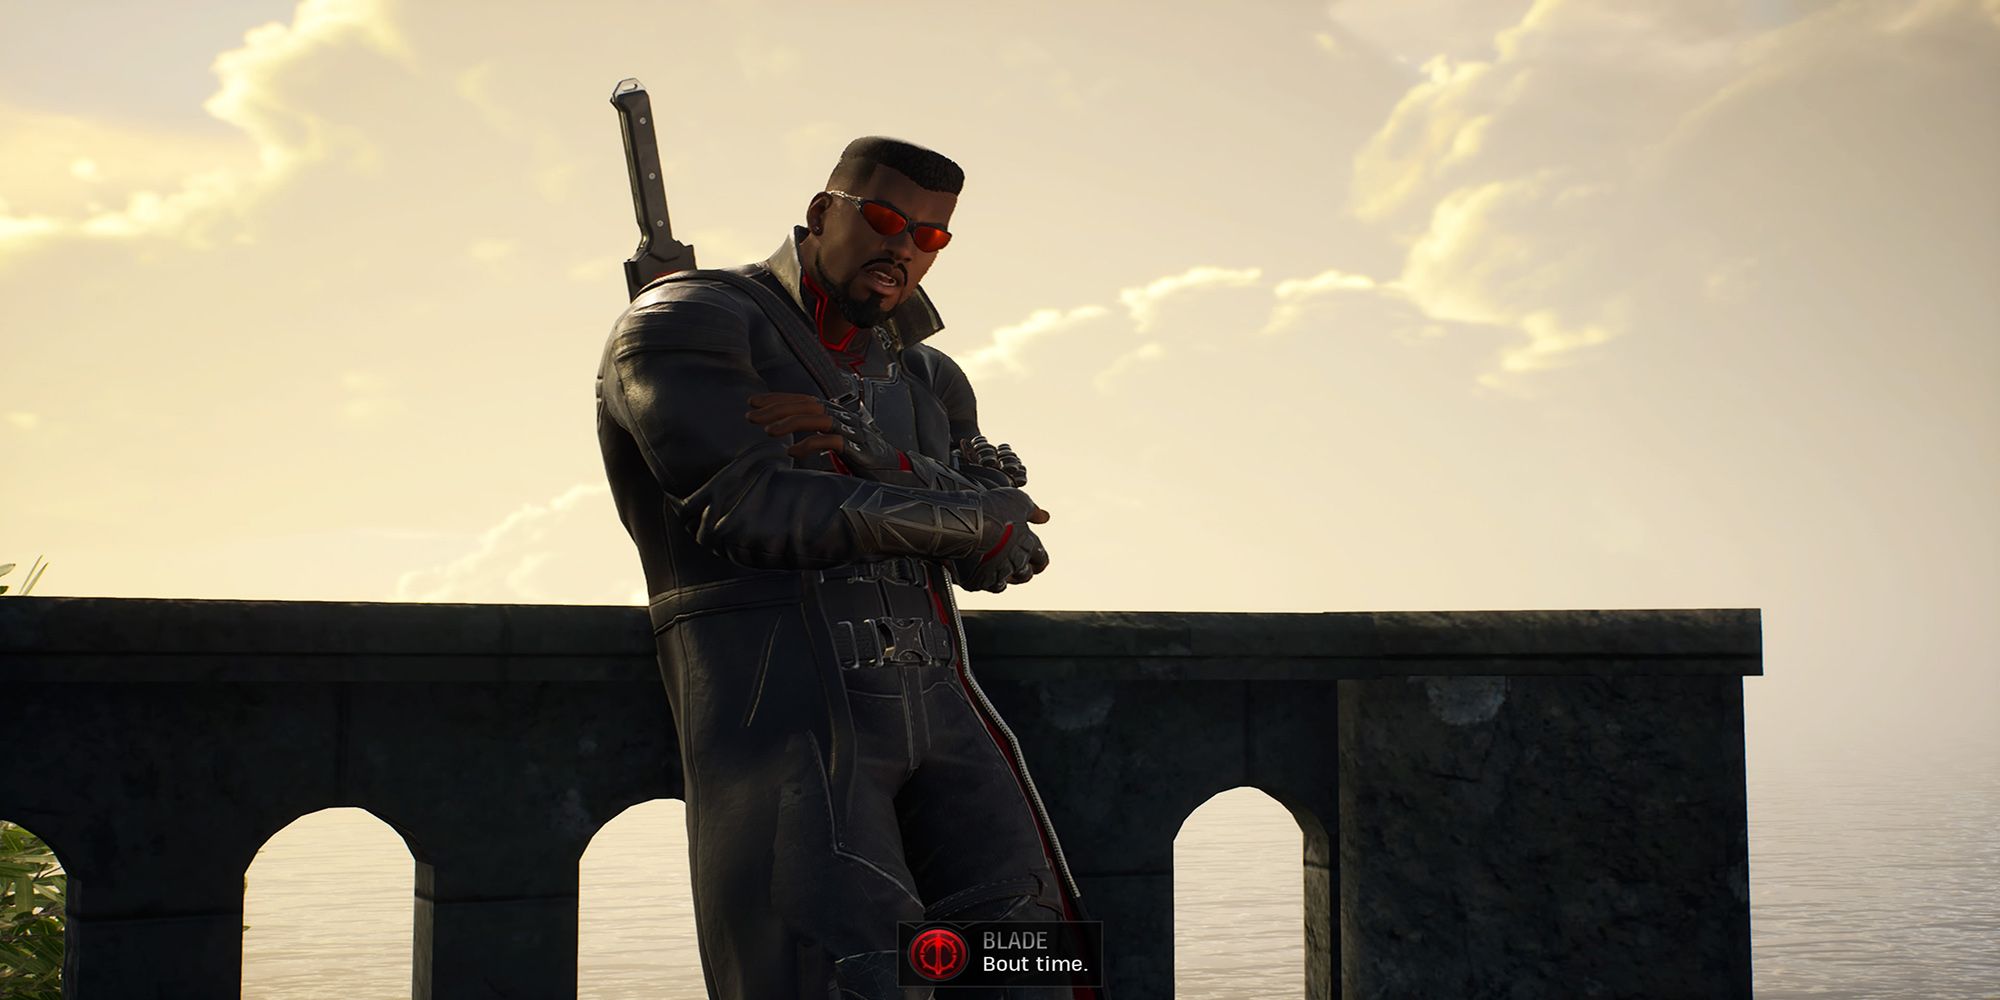 Blade addresses Hunter at the cliff near the Abbey Quarters before a mission in Marvel's Midnight Suns.